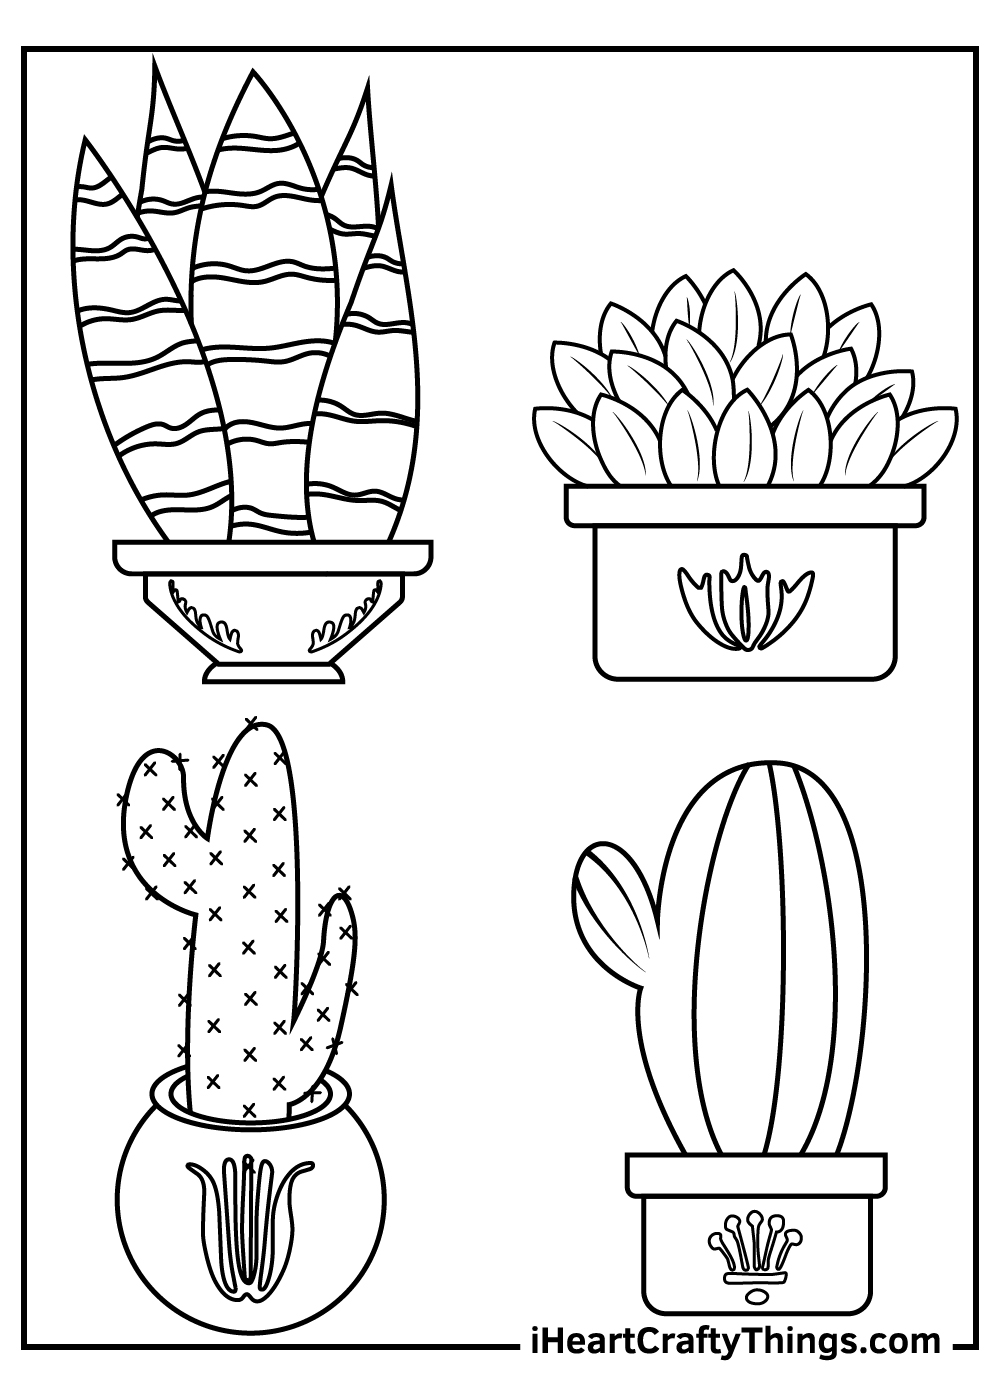 Cactus Coloring Pages Updated 20